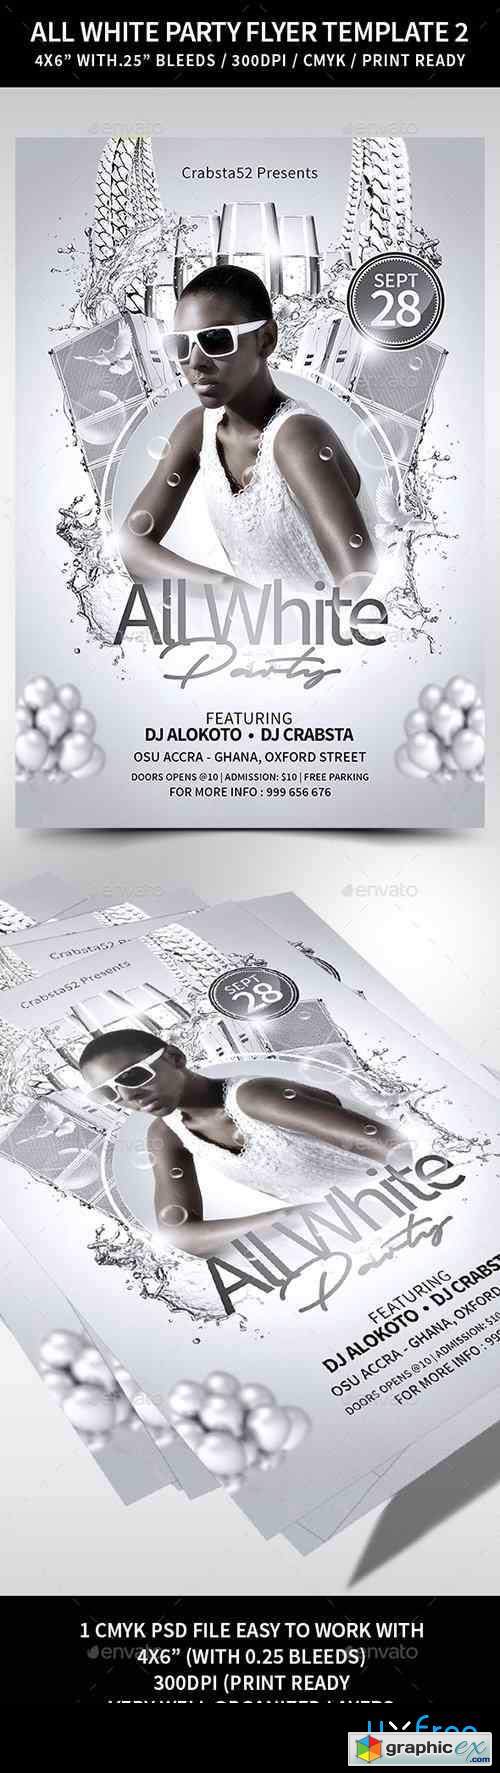 All White Party Flyer Template 2